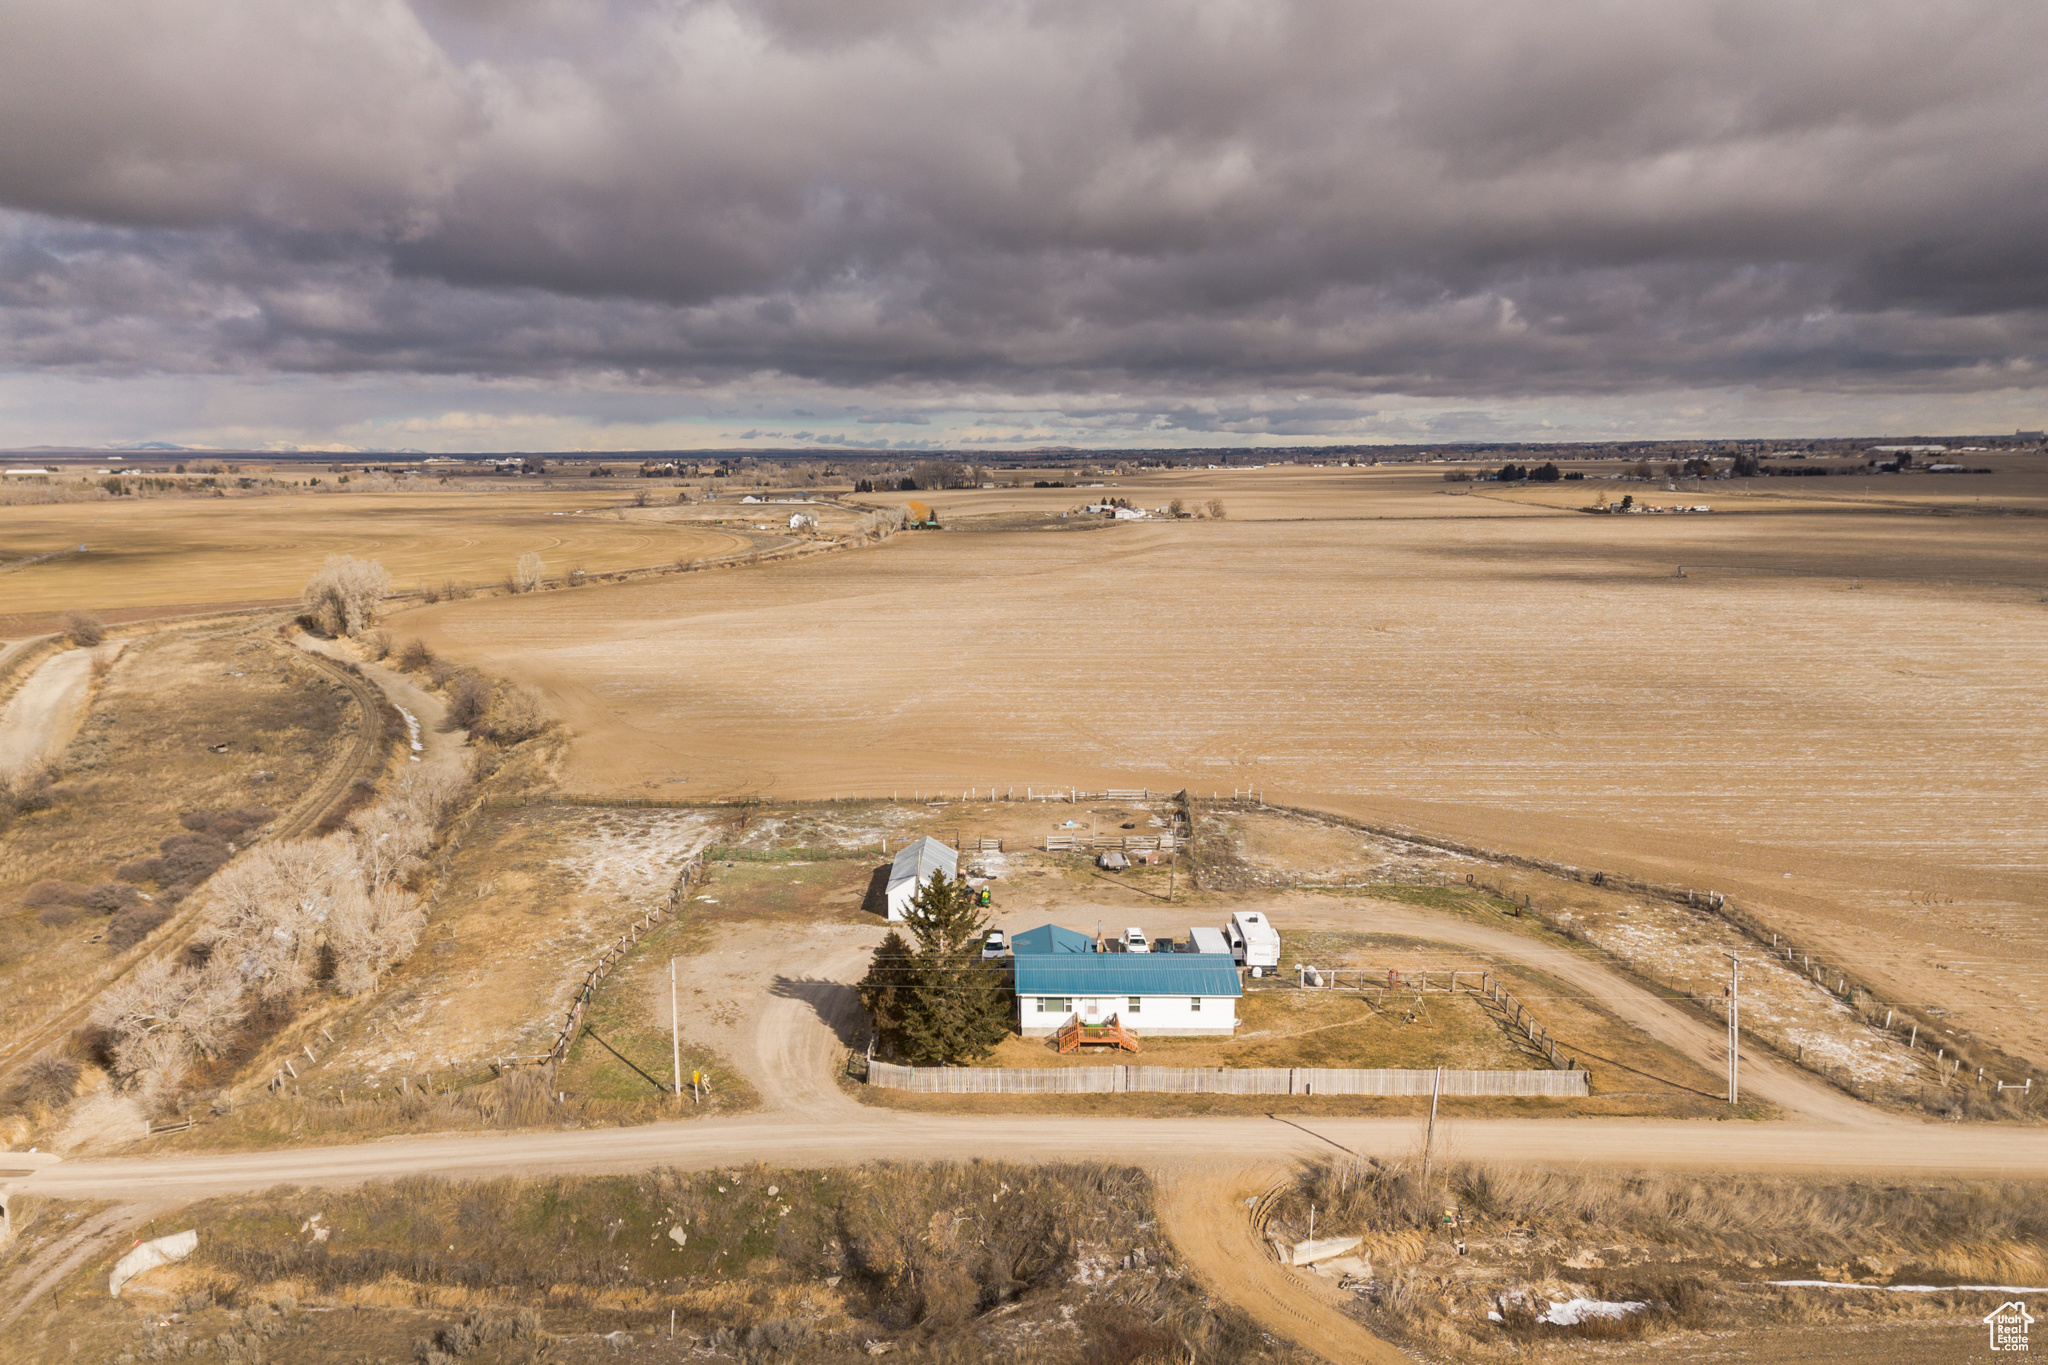 Drone / aerial view with a rural view